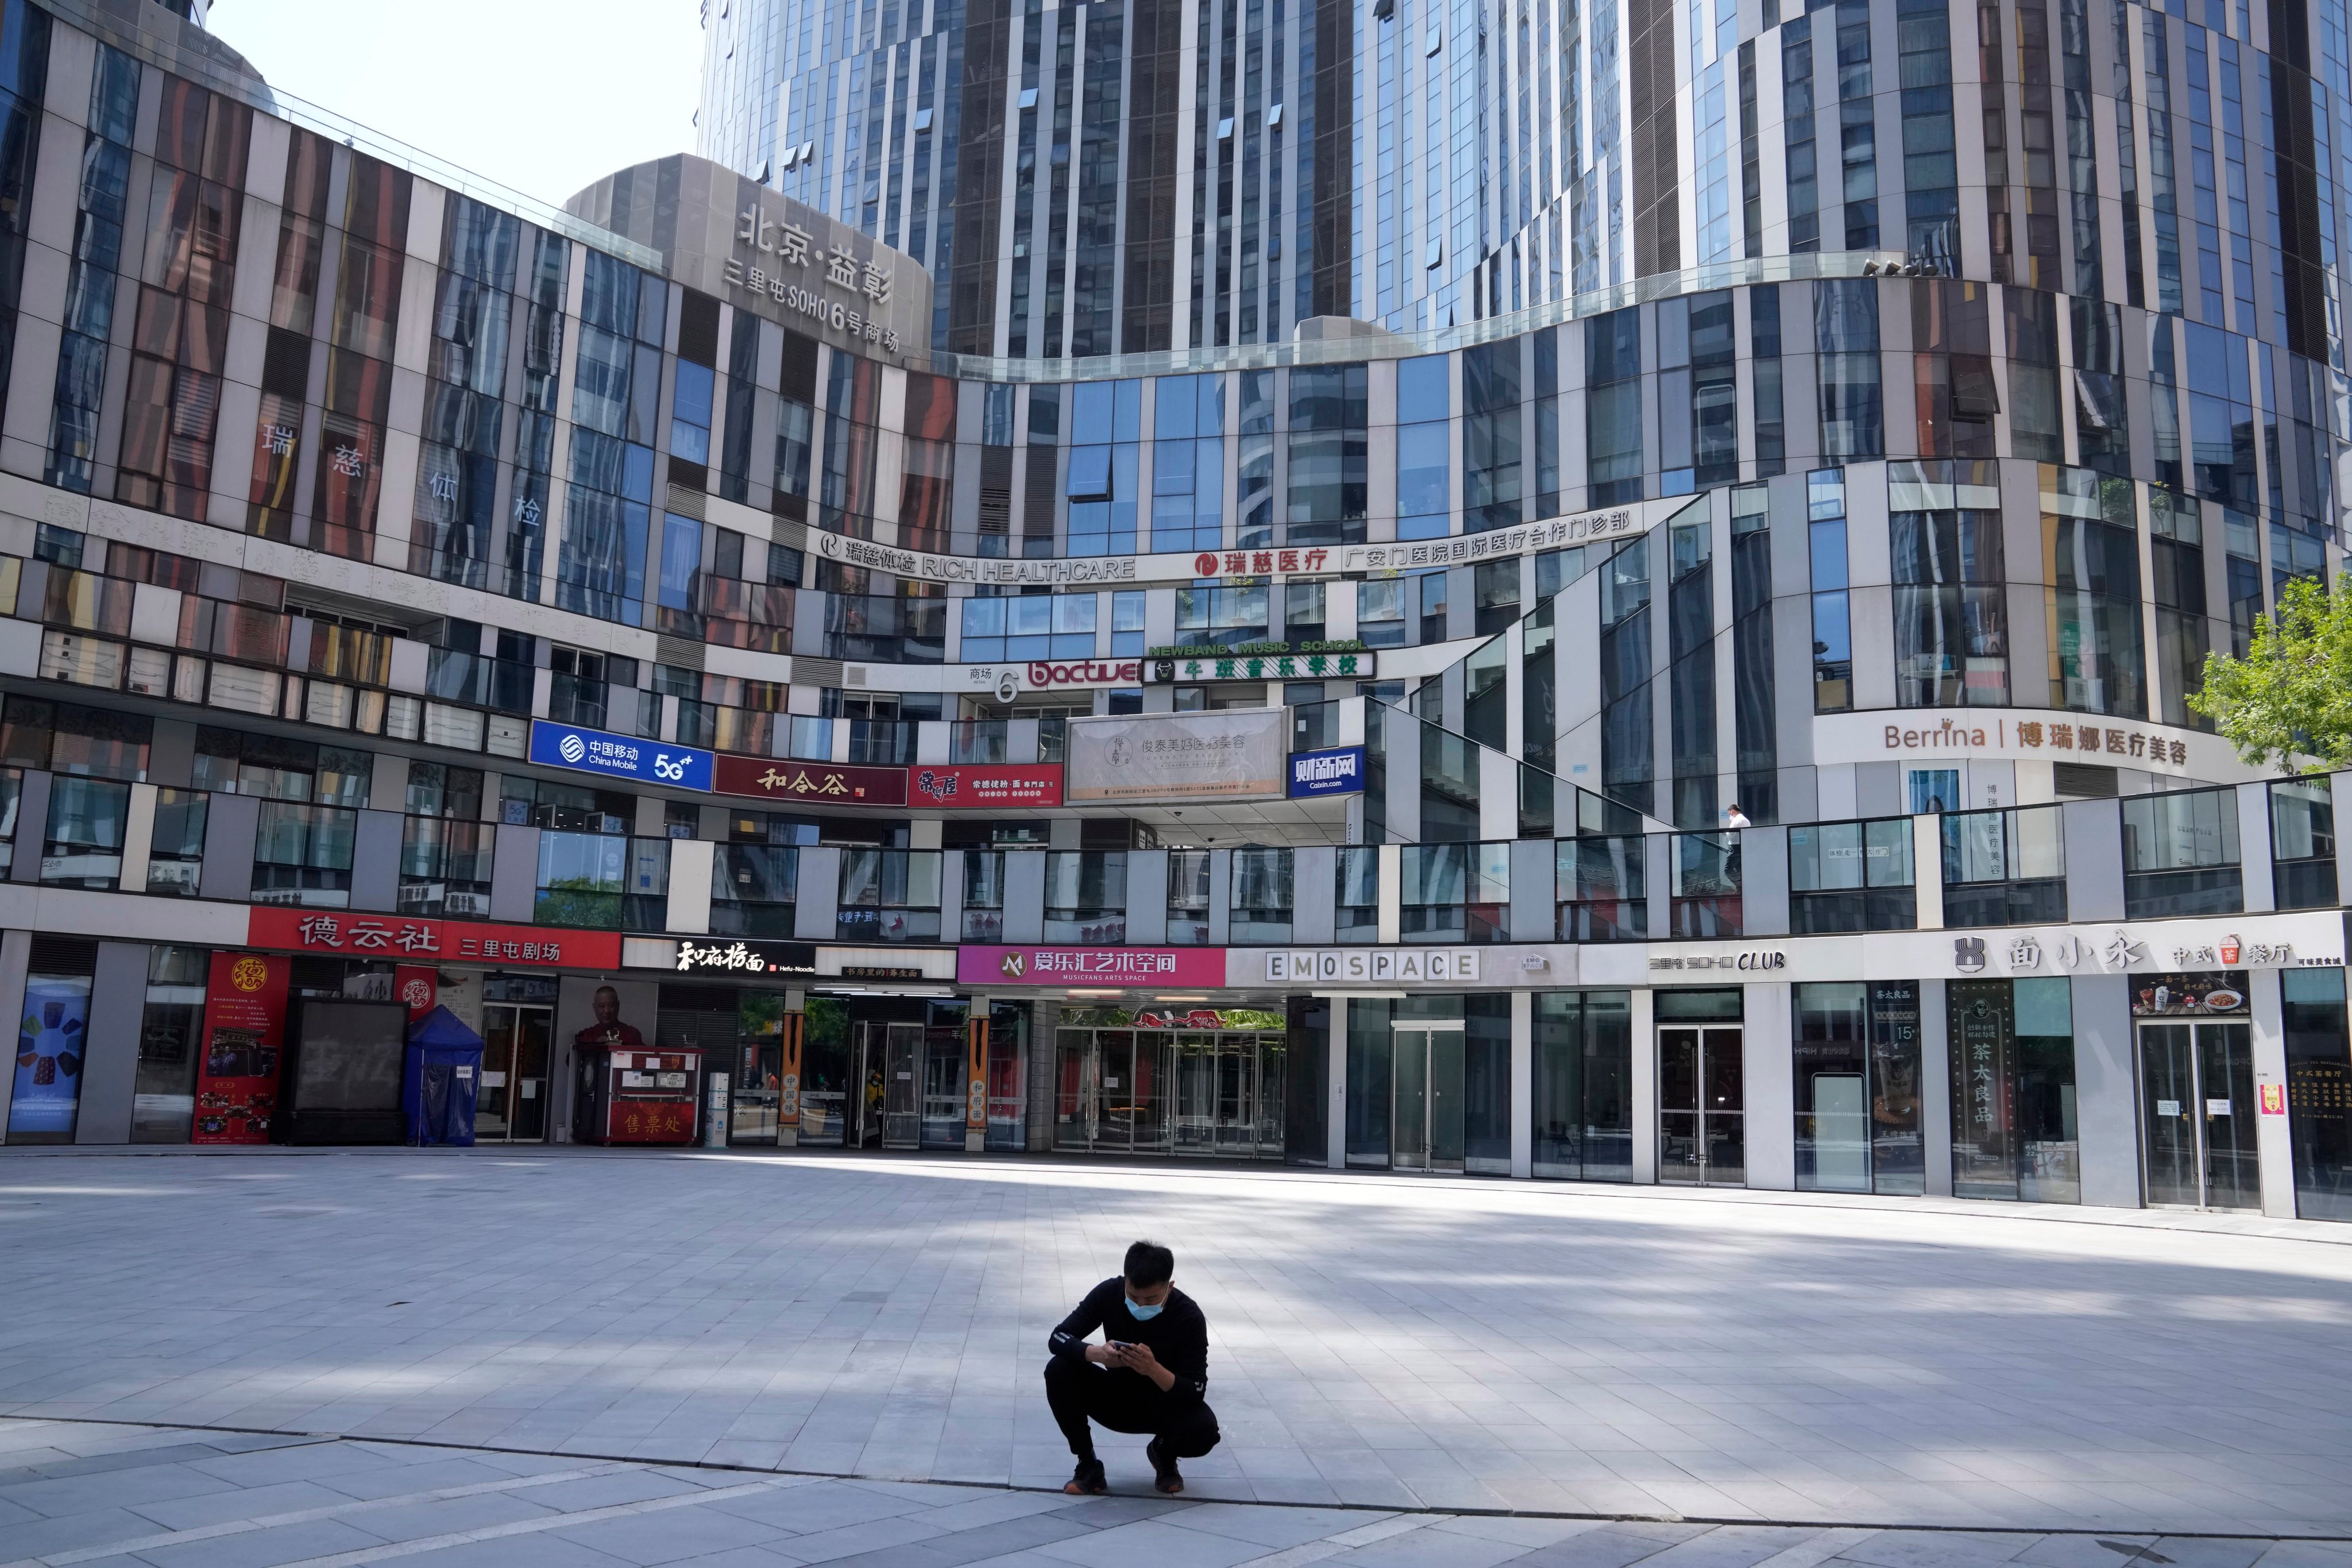 An empty shopping centre in Beijing. There are more than 5,100 Airbnb owners in Beijing, and their earnings have plummeted along with international visitor arrivals in China’s capital. Photo: AP